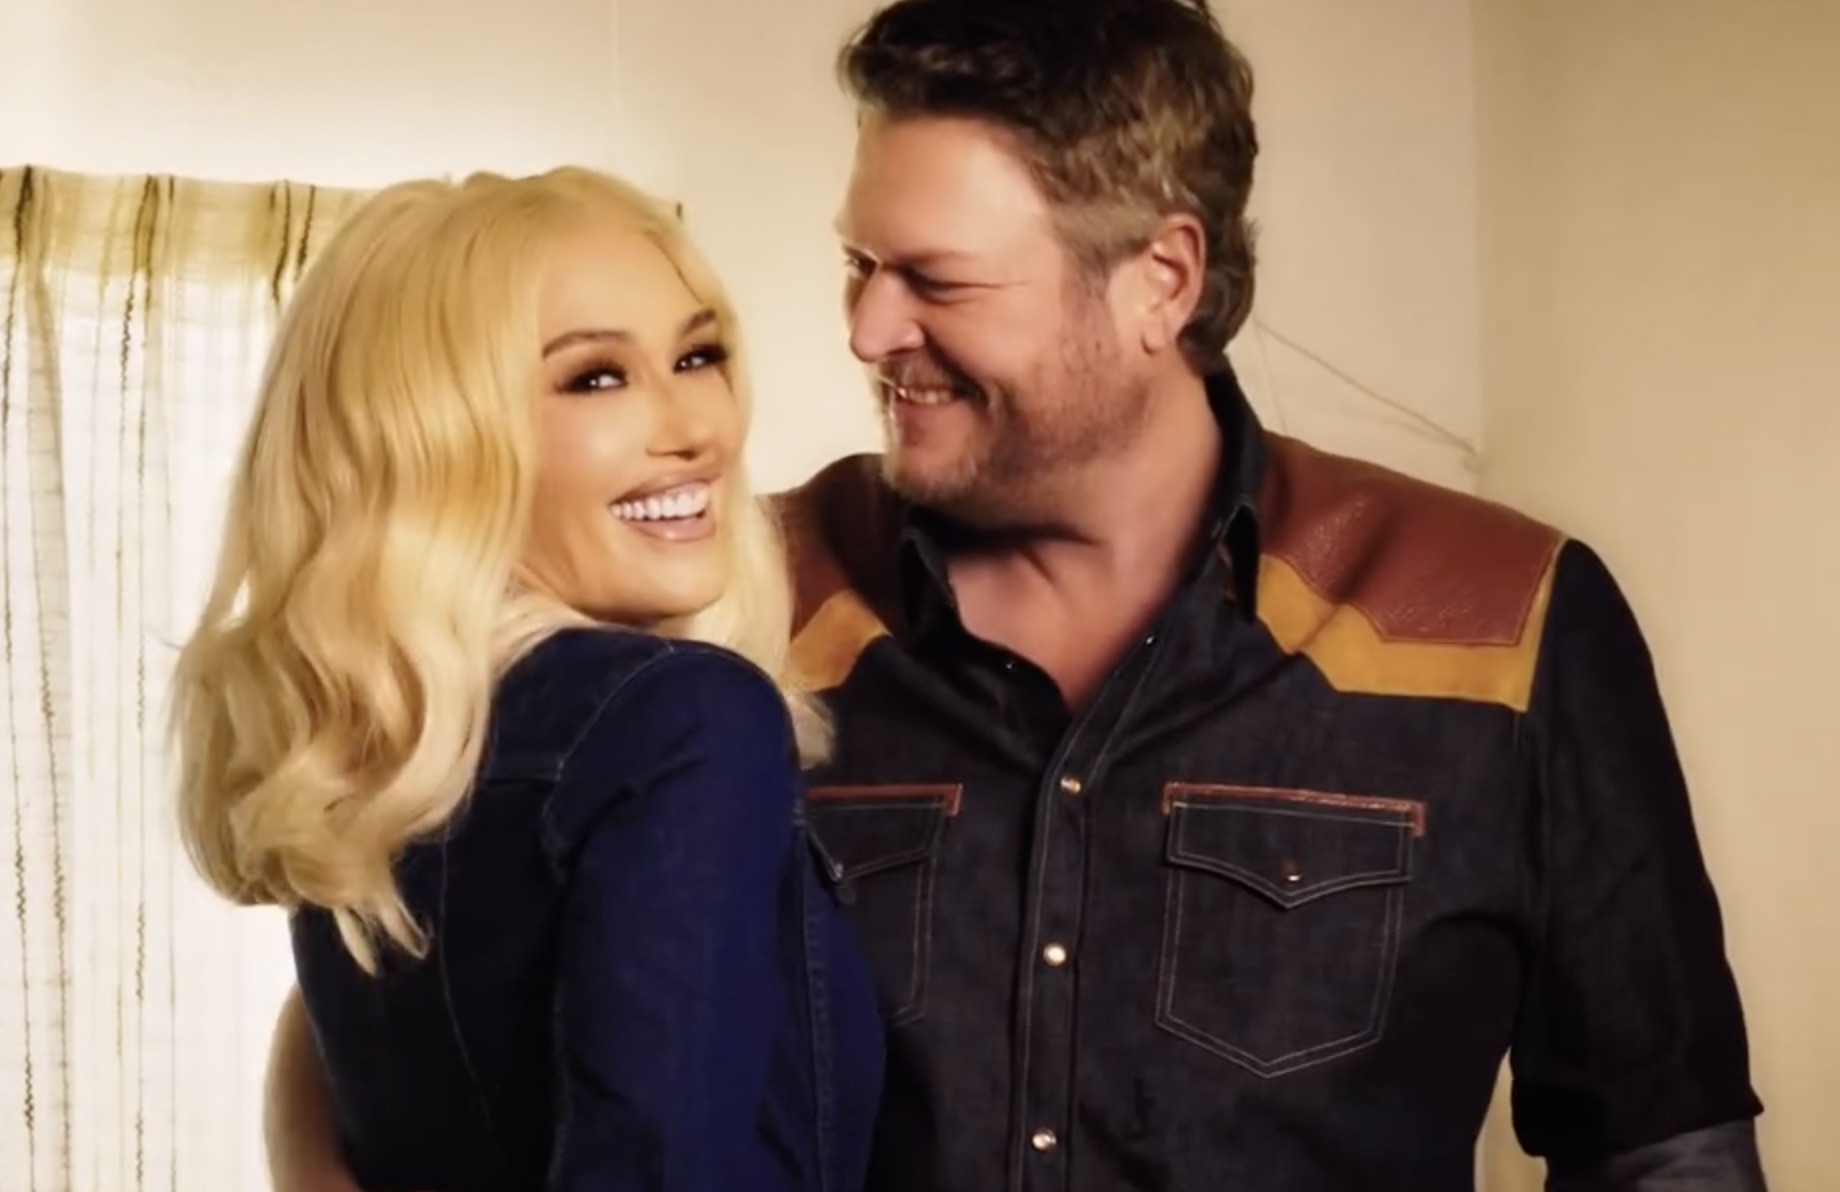 Despite the rumors, Gwen and Blake released a love song together